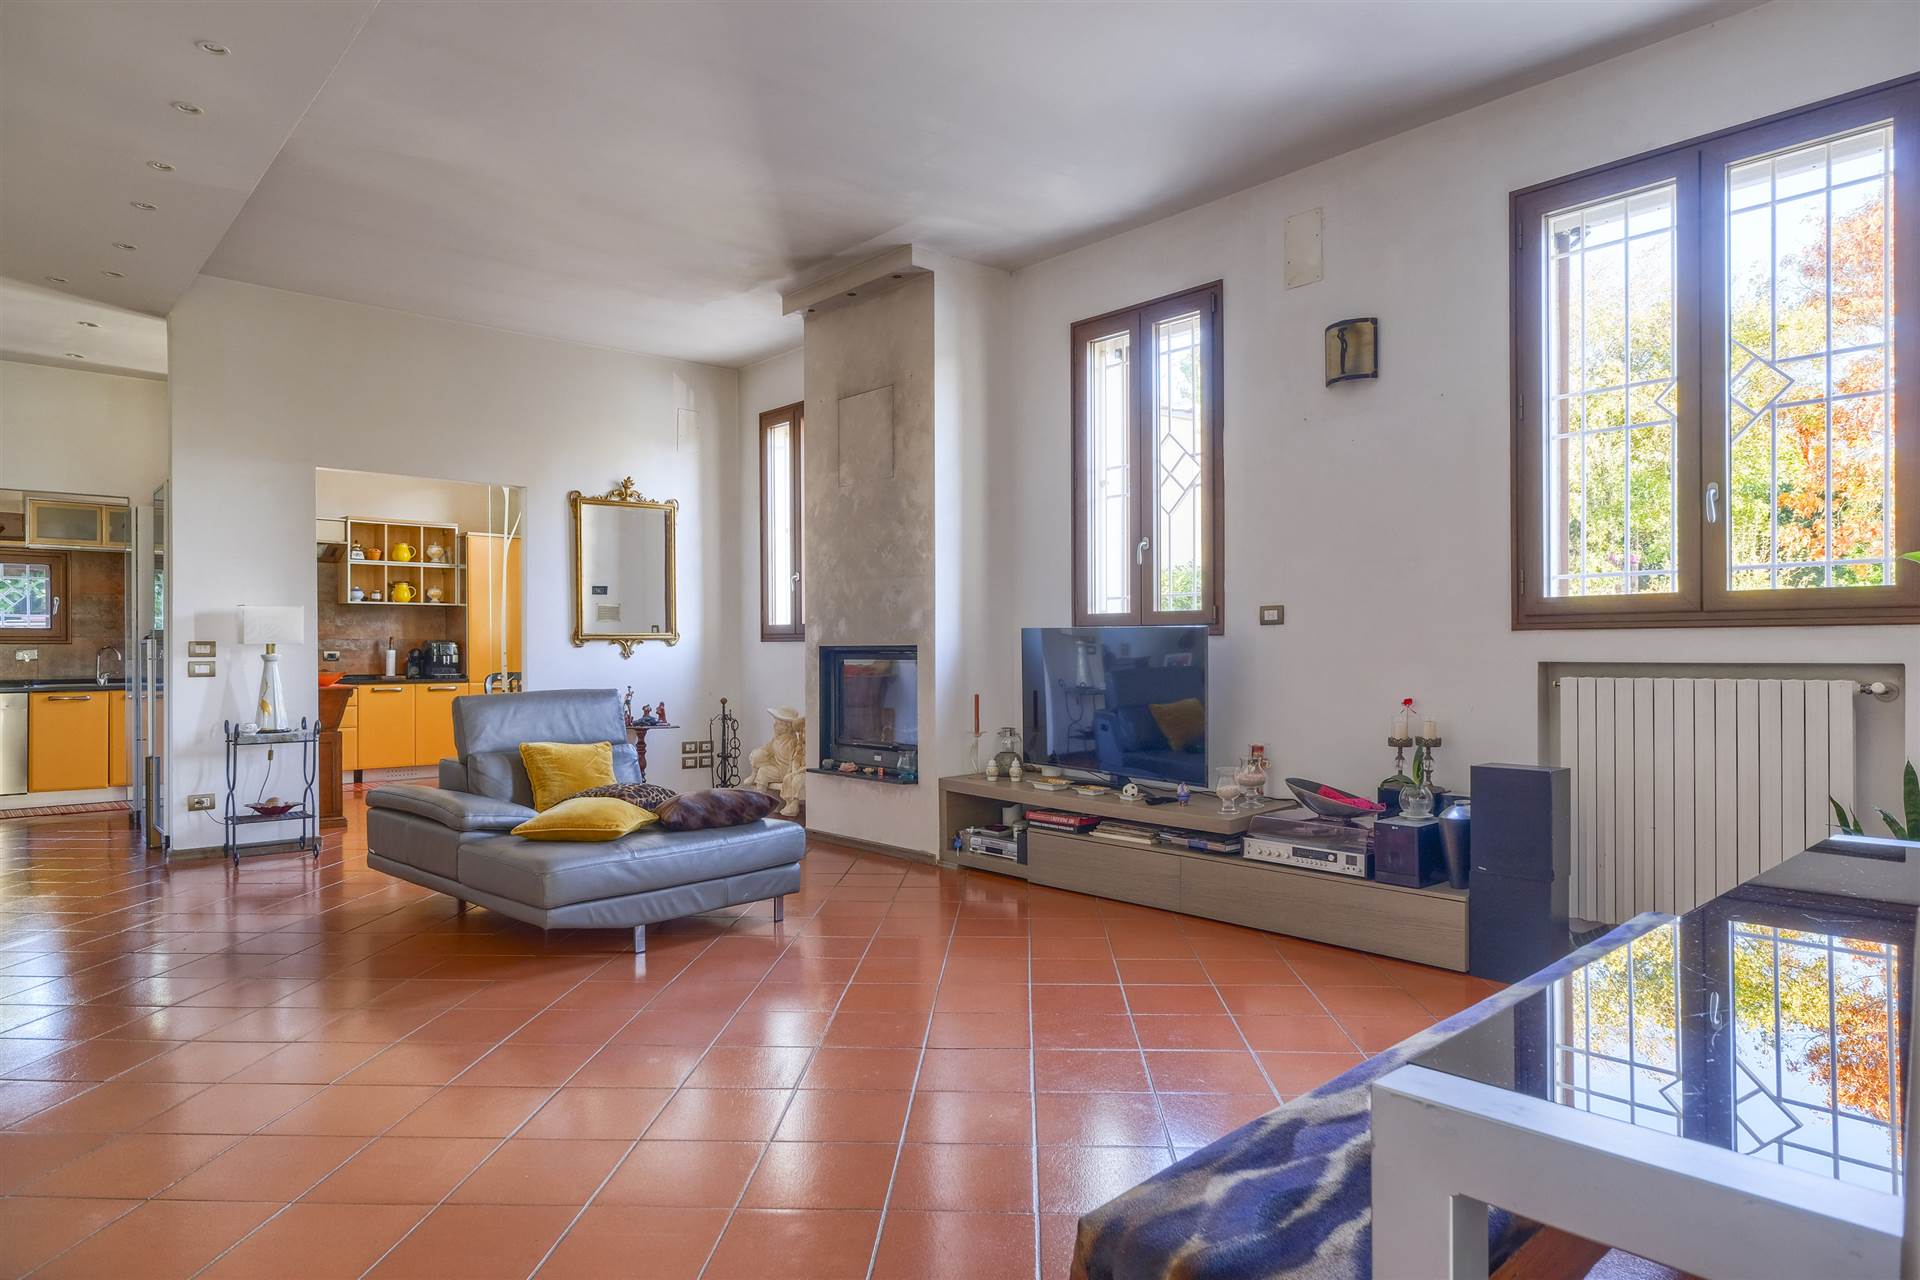 CASELLINE, VAGLIA, Villa for sale of 247 Sq. mt., Restored, Heating Individual heating system, Energetic class: C, Epi: 84,161 kwh/m2 year, placed at 